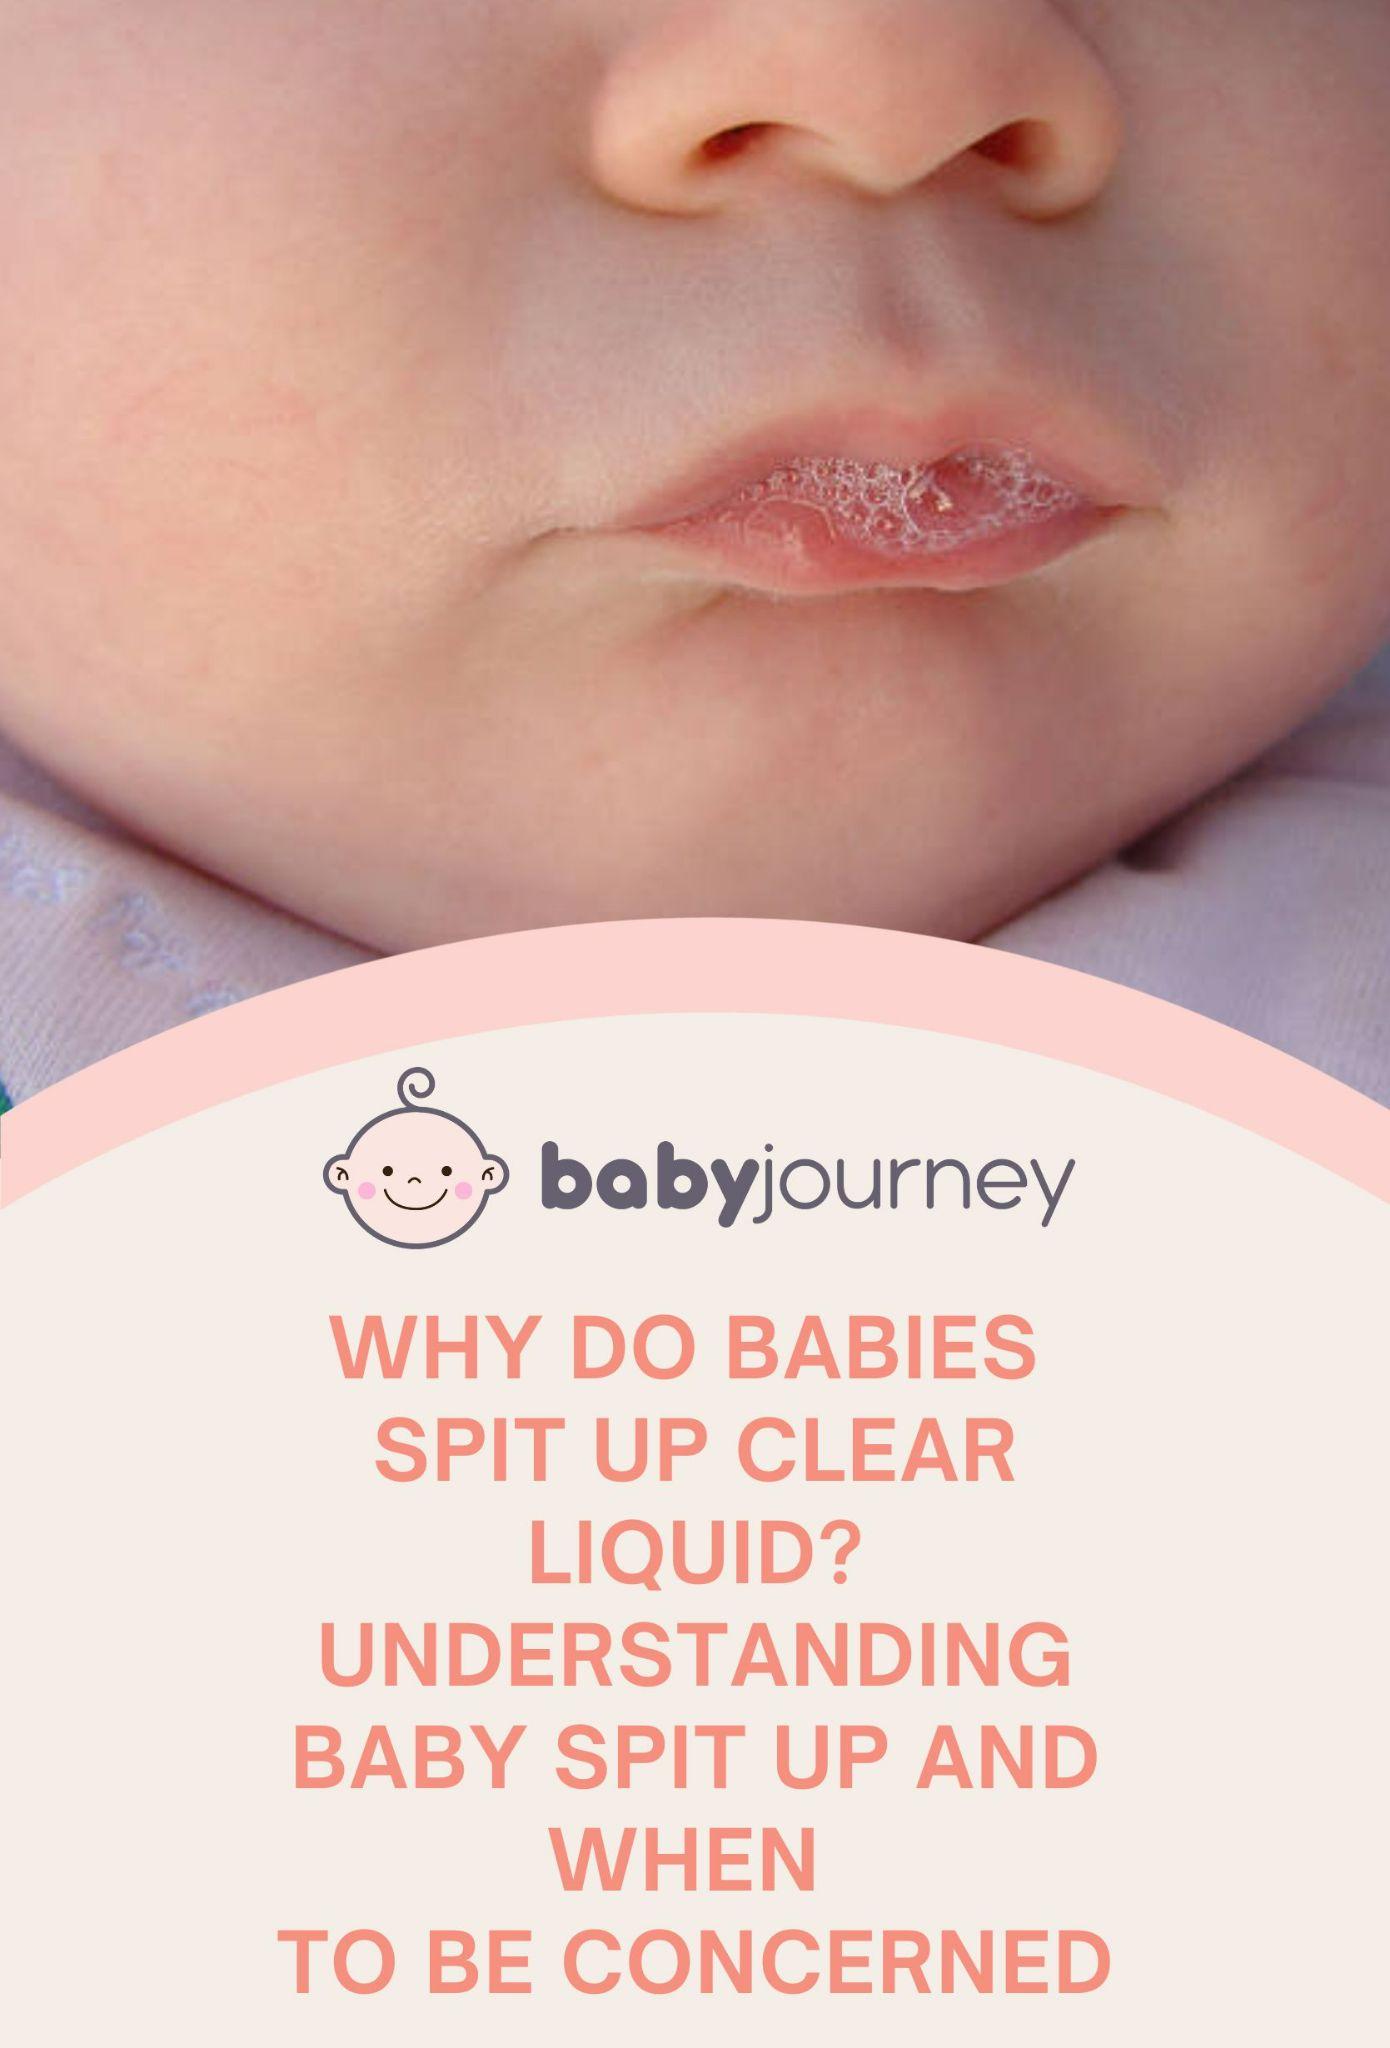 Why Do Babies Spit Up Clear Liquid? Understanding Baby Spit Up and When to Be Concerned Pinterest Image - Baby Journey